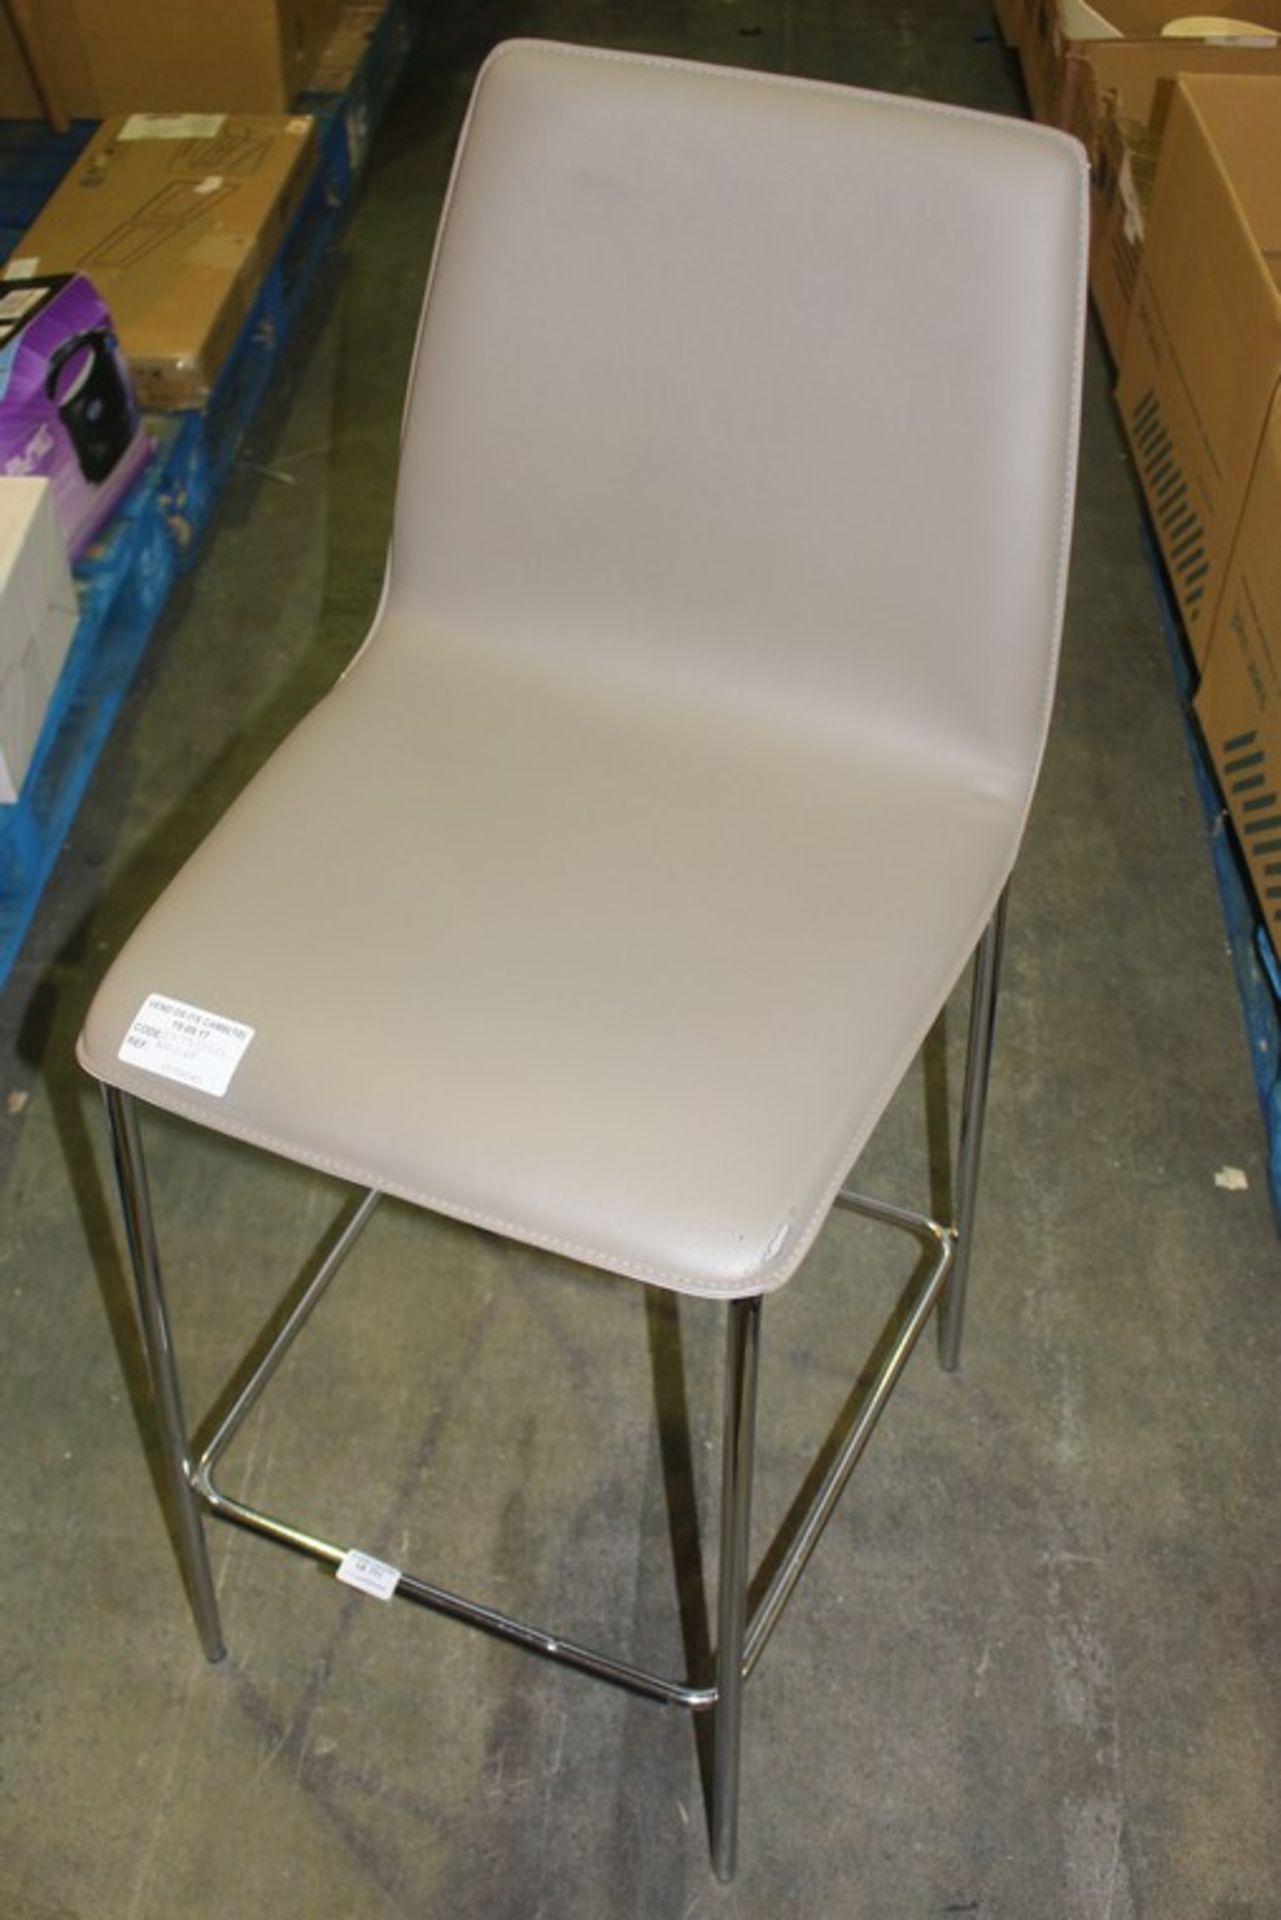 1 x XAVIER BAR STOOL RRP £50 (19/09/17) (2373020) *PLEASE NOTE THAT THE BID PRICE IS MULTIPLIED BY